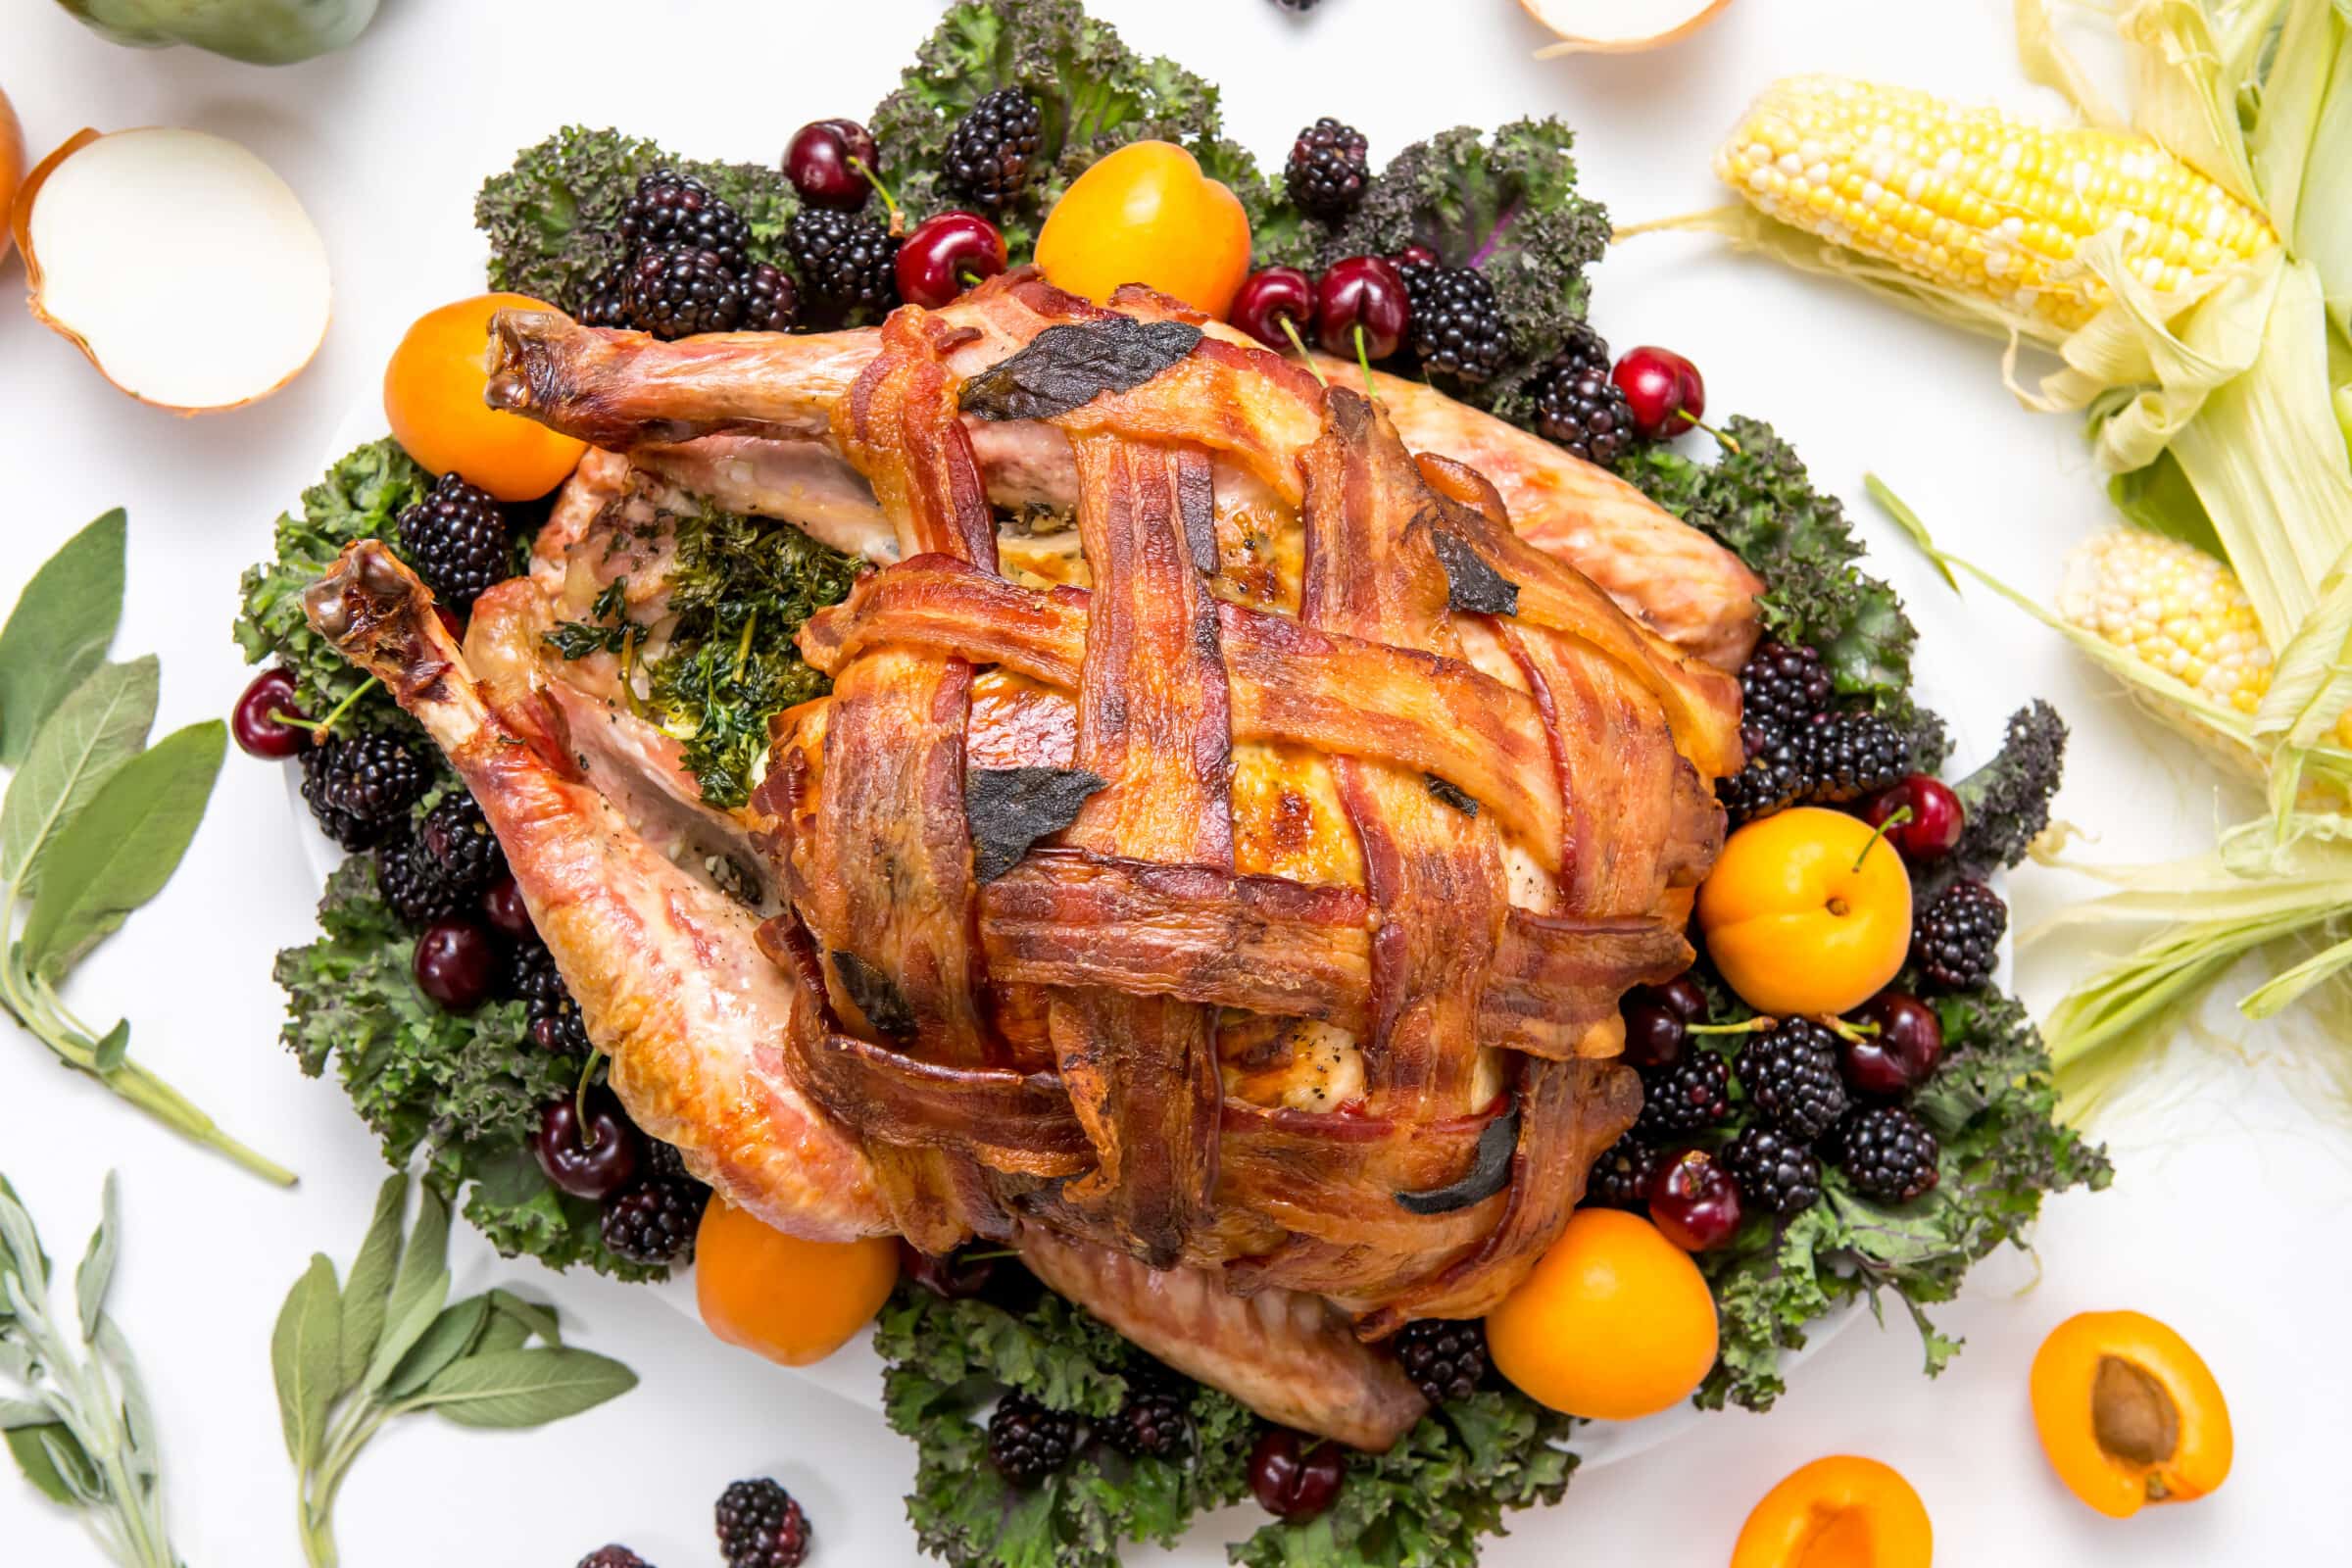 5D4B9754 - Bacon Wrapped Turkey - plated bacon wrapped turkey on a white table surrounded by corn, oranges, onions, bell pepper, blueberries, apricots and sage